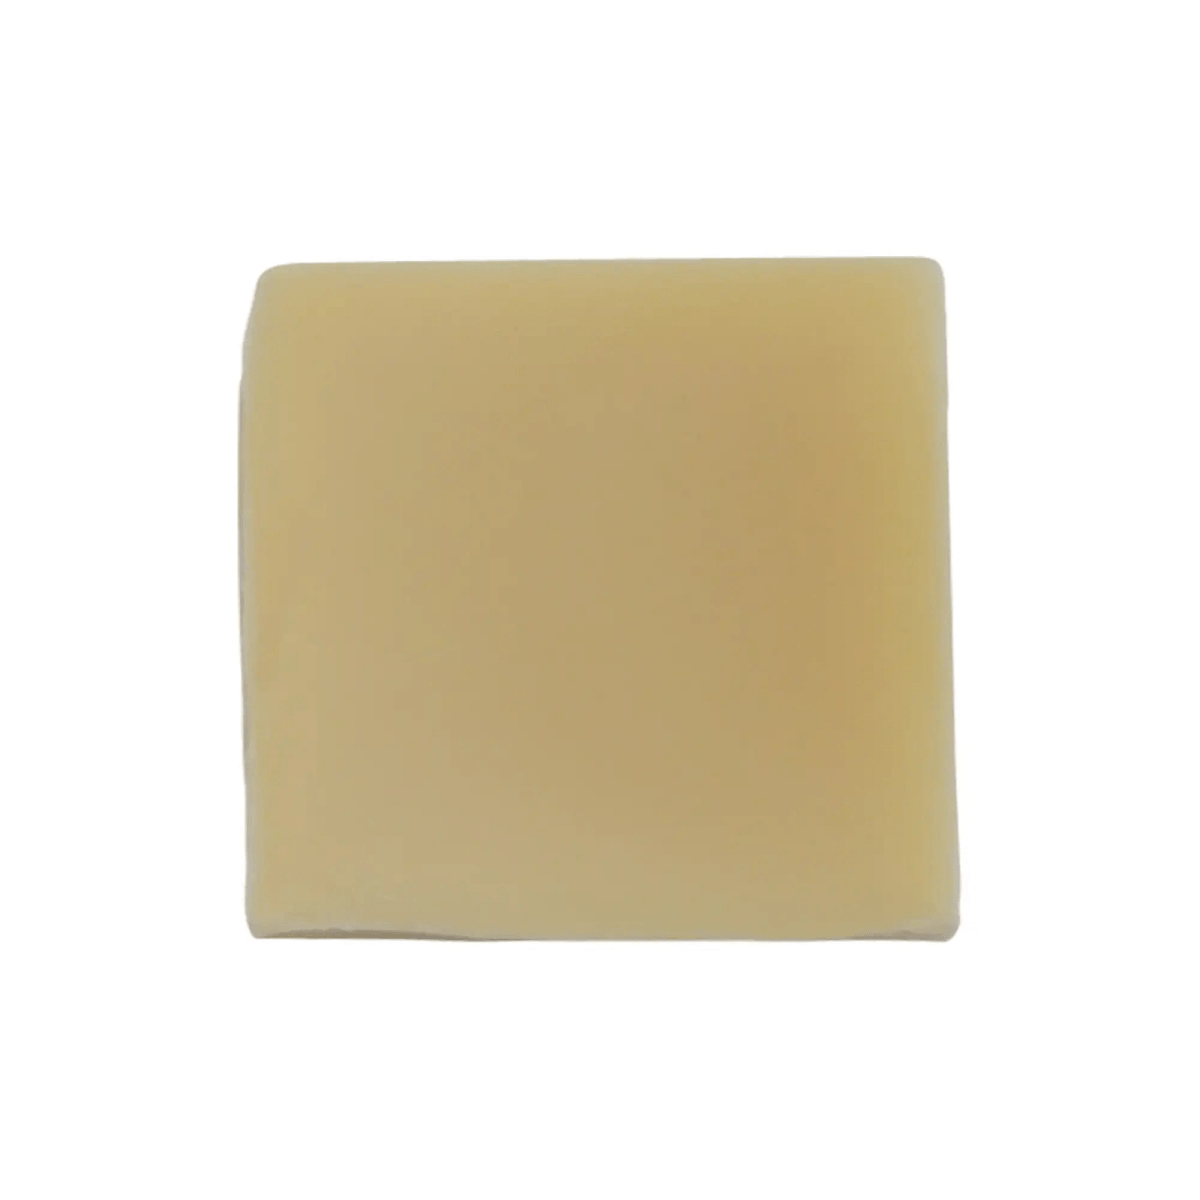 Natural Organic Coconutty Soap - lusatian